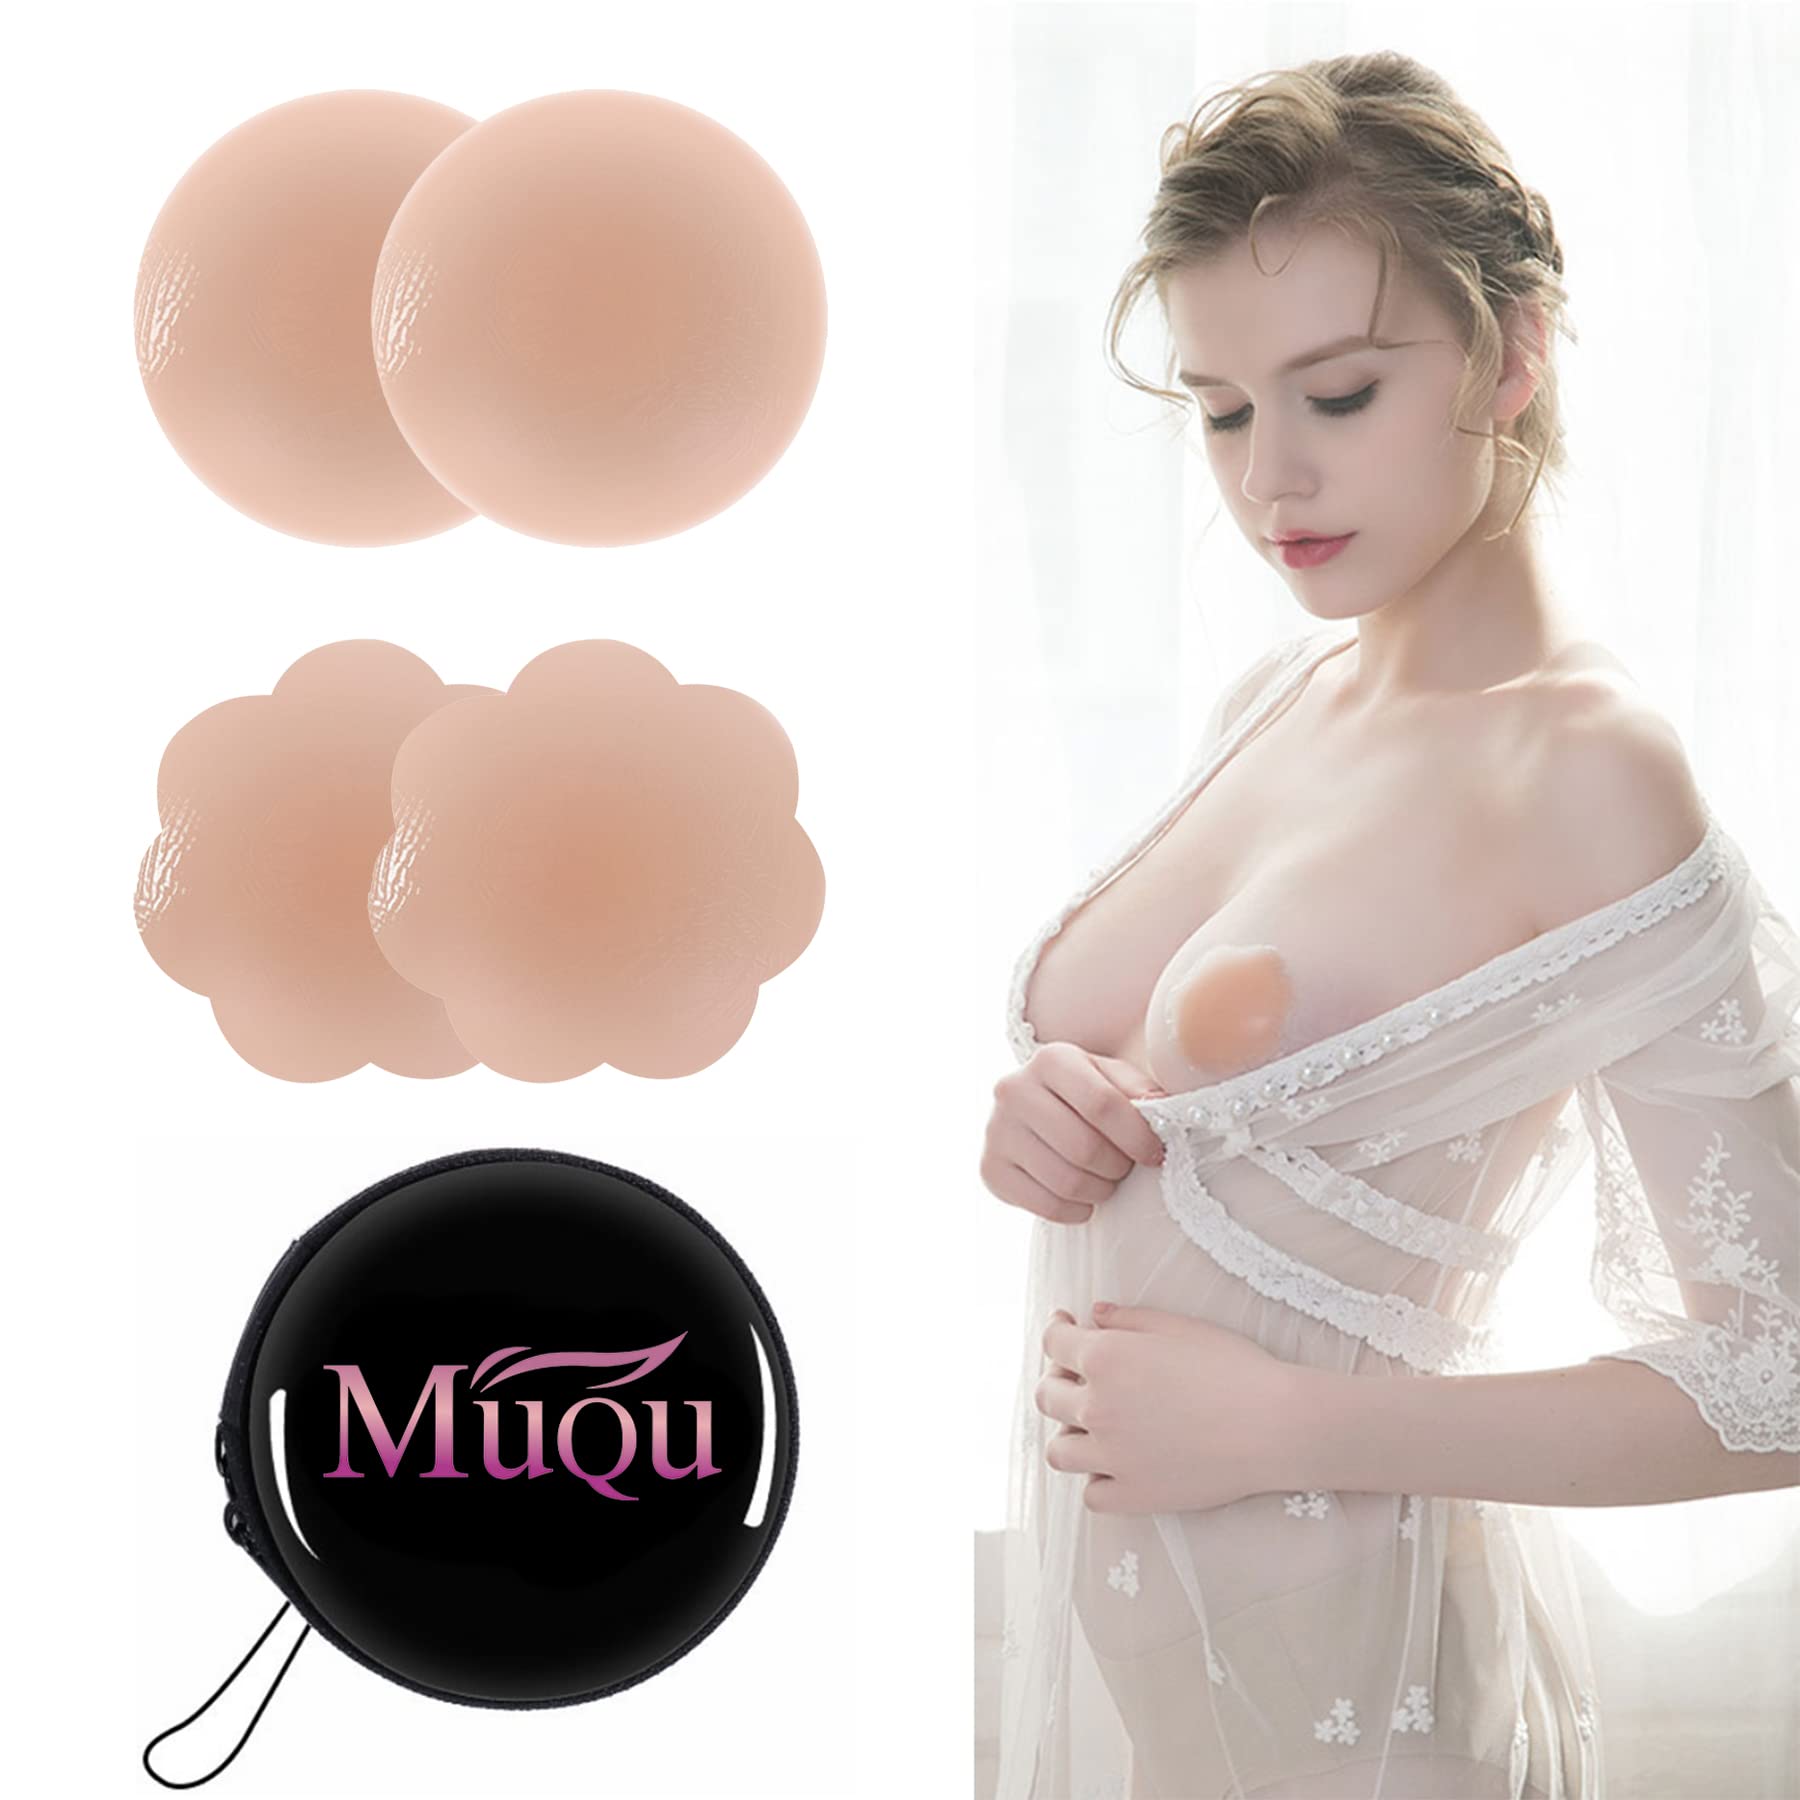 MUQU Pasties Nipple Covers - Silicone Nipple Covers Reusable Adhesive Invisible Nippleless Cover Breast Petals for Women